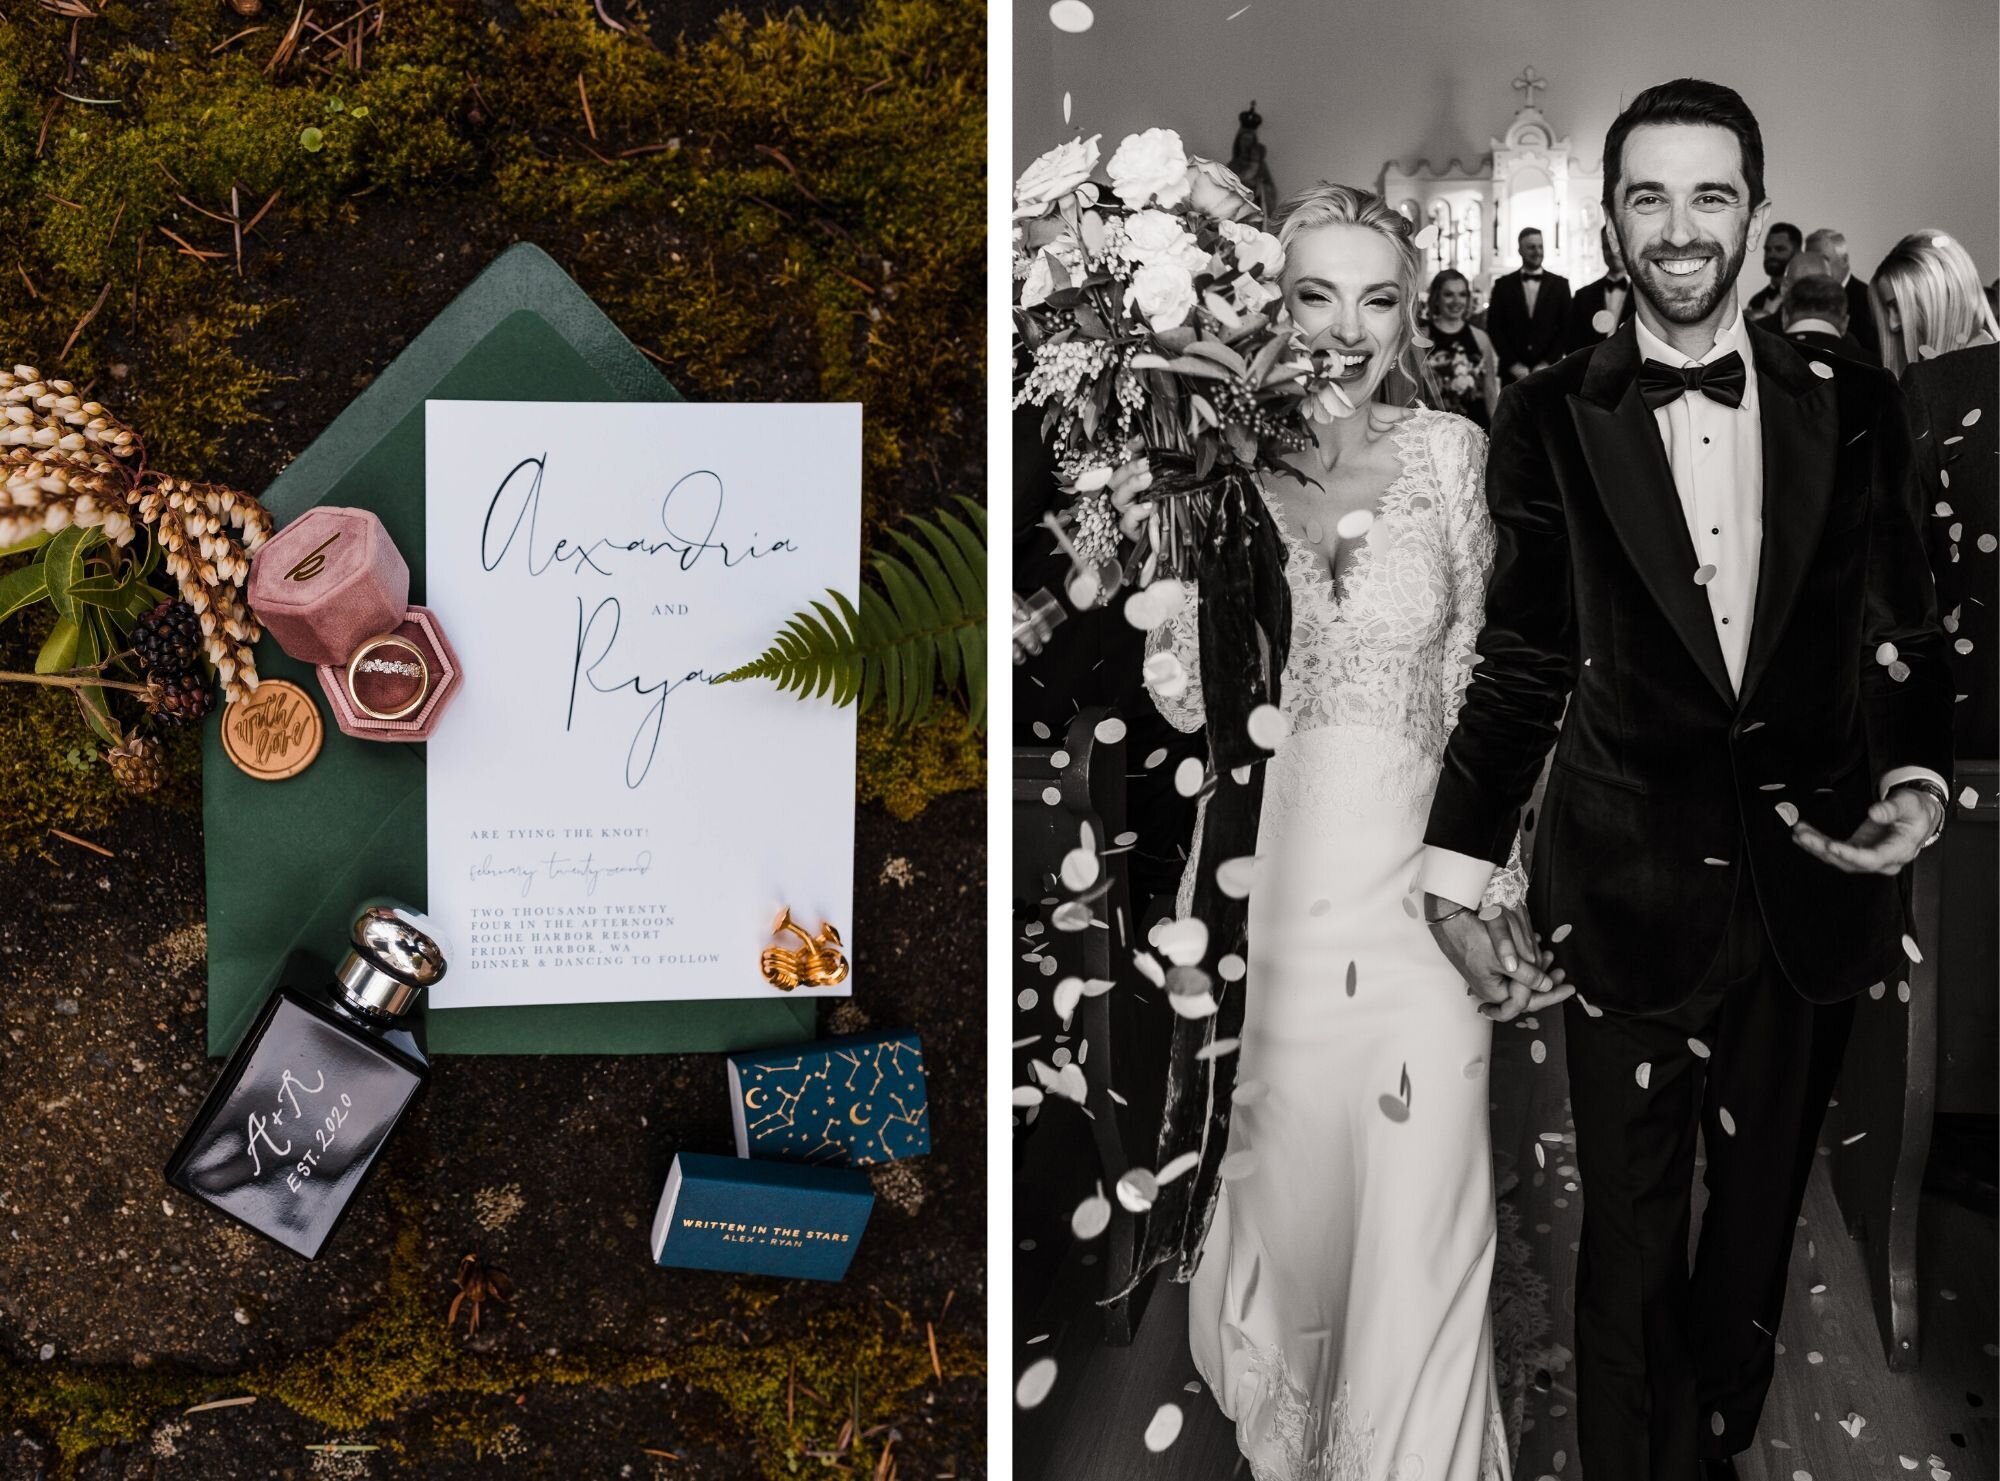 Creative ways to get married: how to still have your wedding during coronavirus quarantine | Between the Pine Adventure Wedding Photography